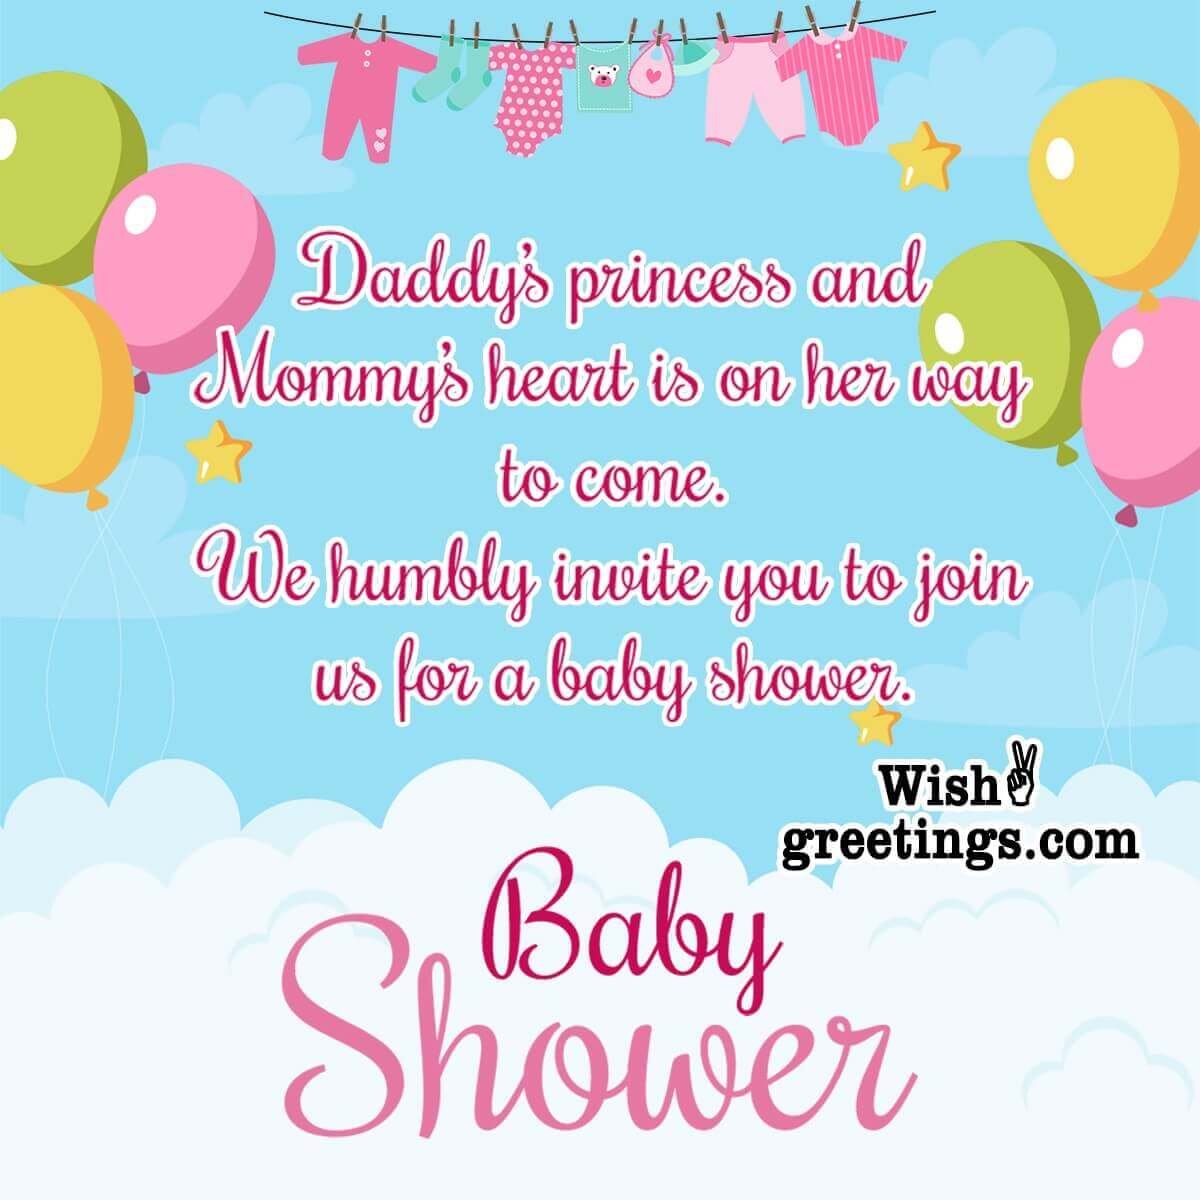 Baby Shower Invitation Messages - Wish Greetings